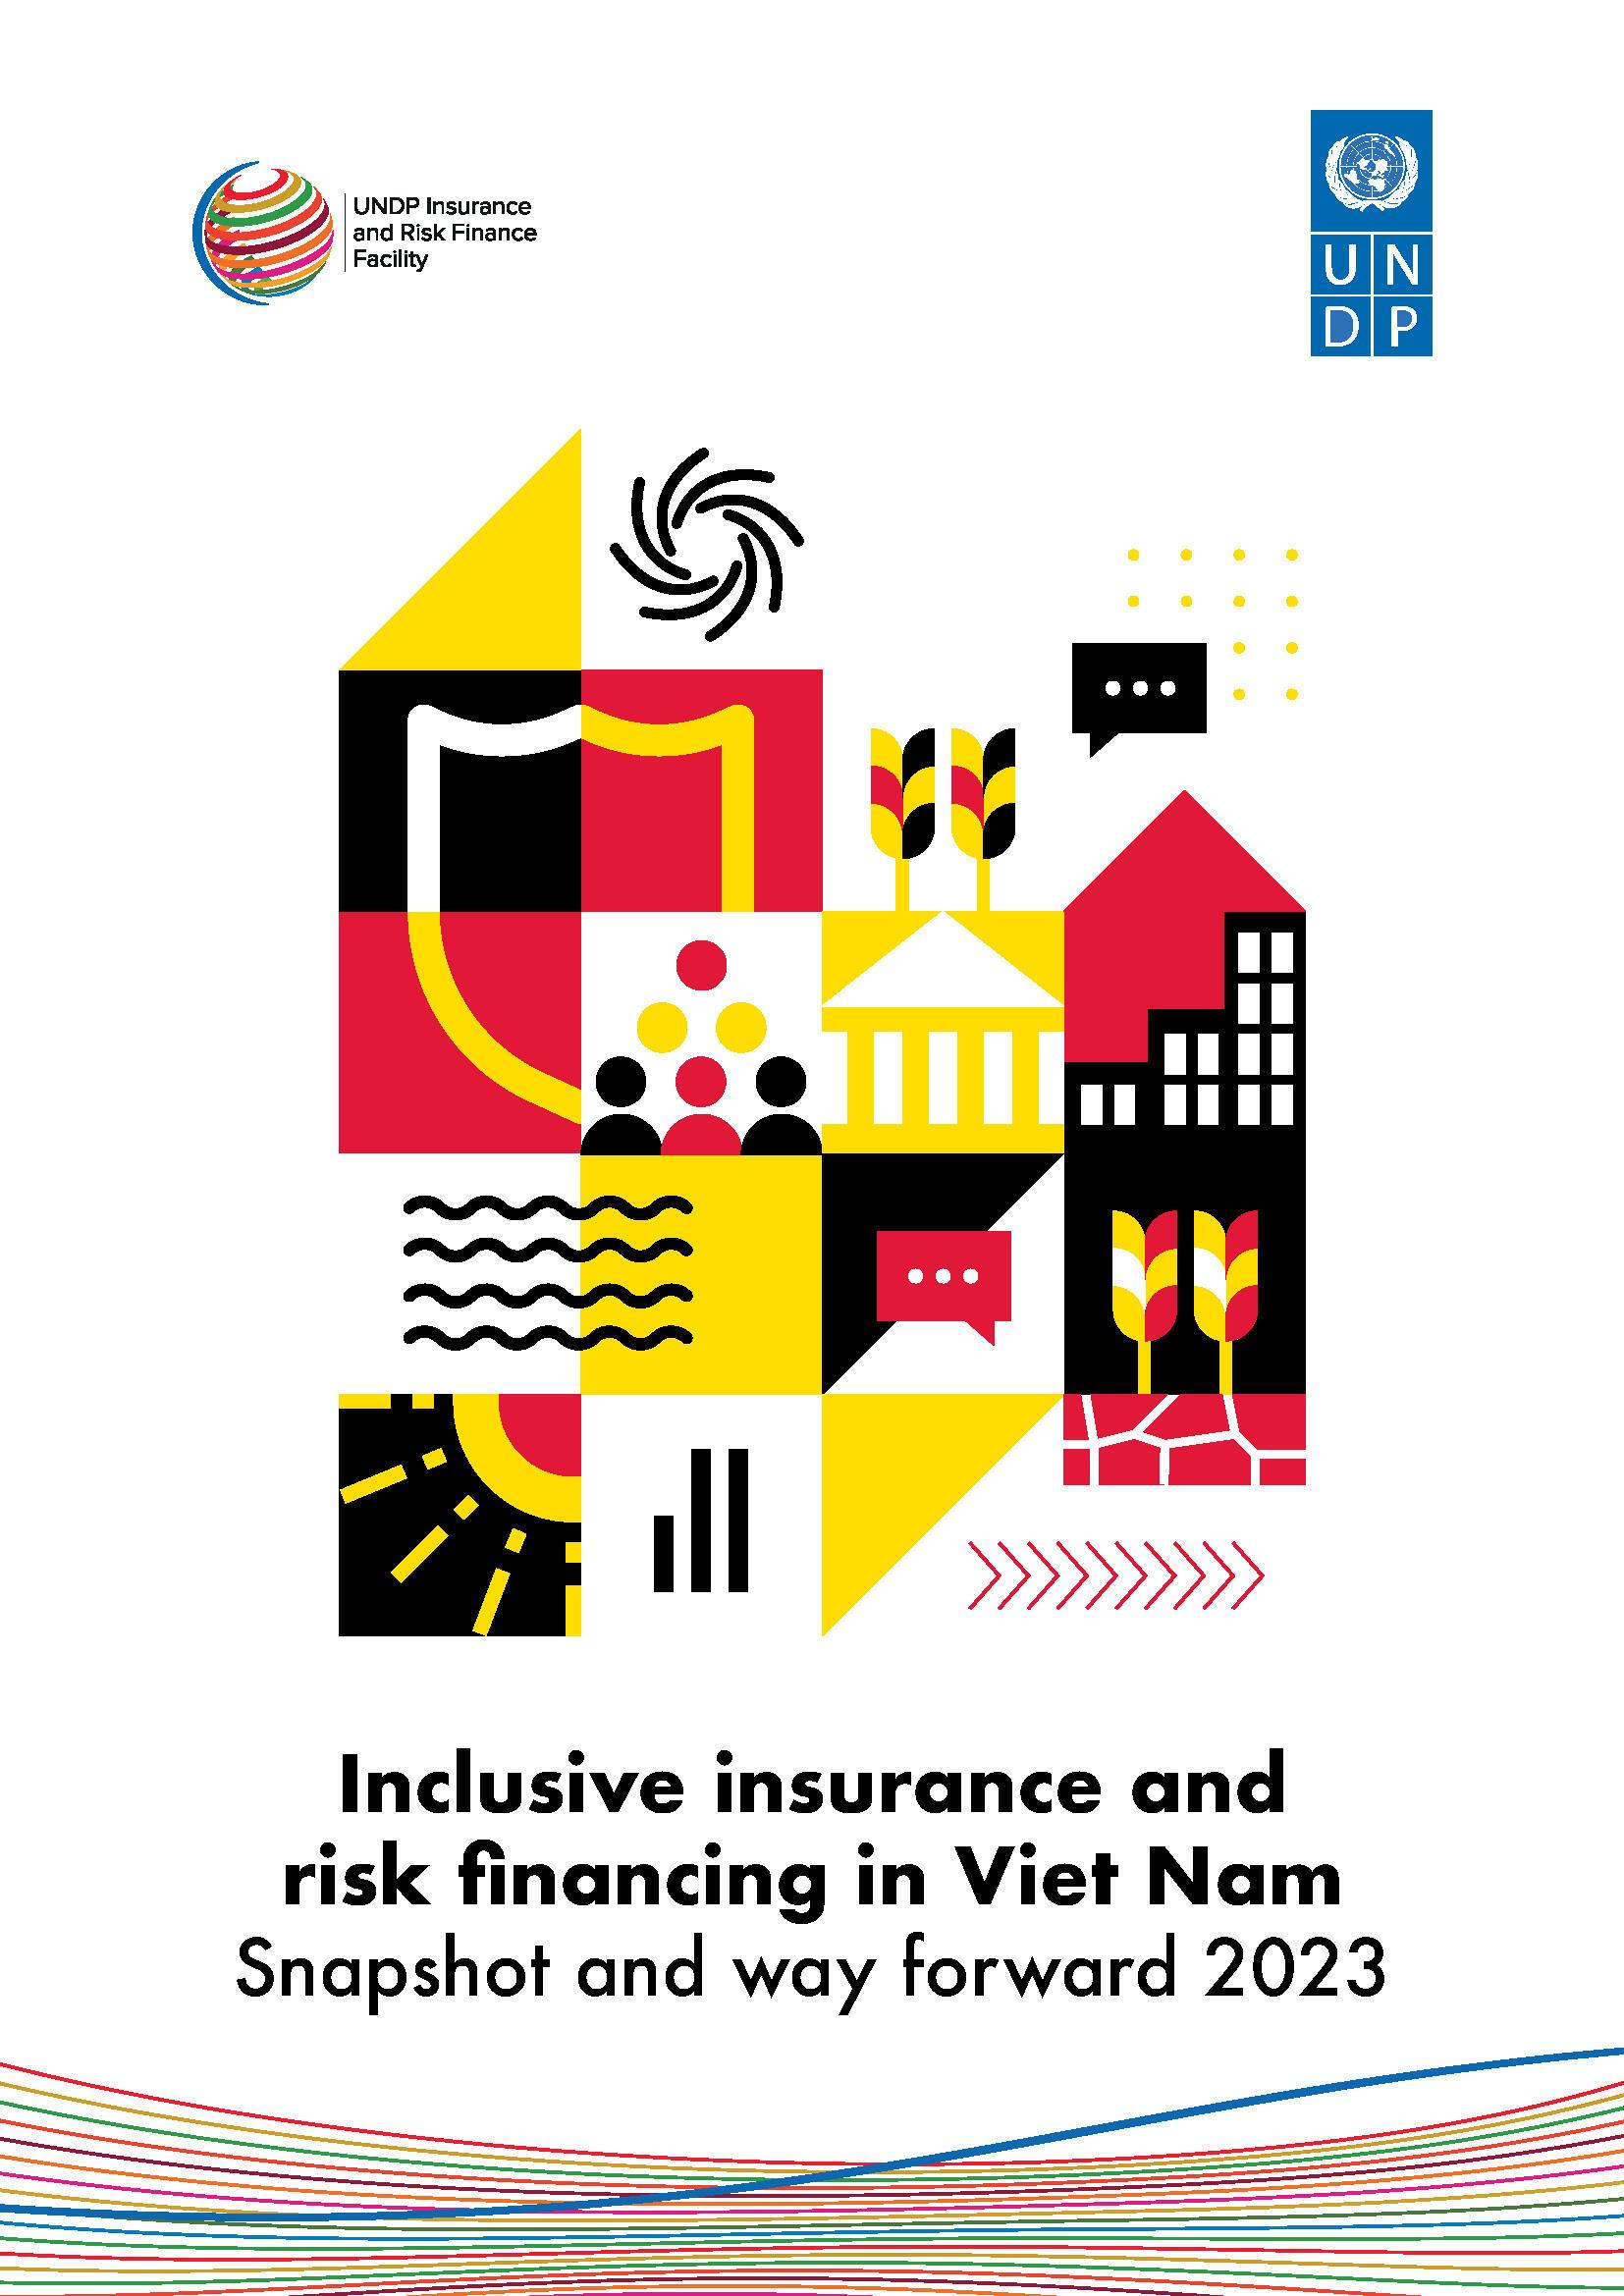 Inclusive insurance and risk financing in Viet Nam. Snapshot and way forward 2023